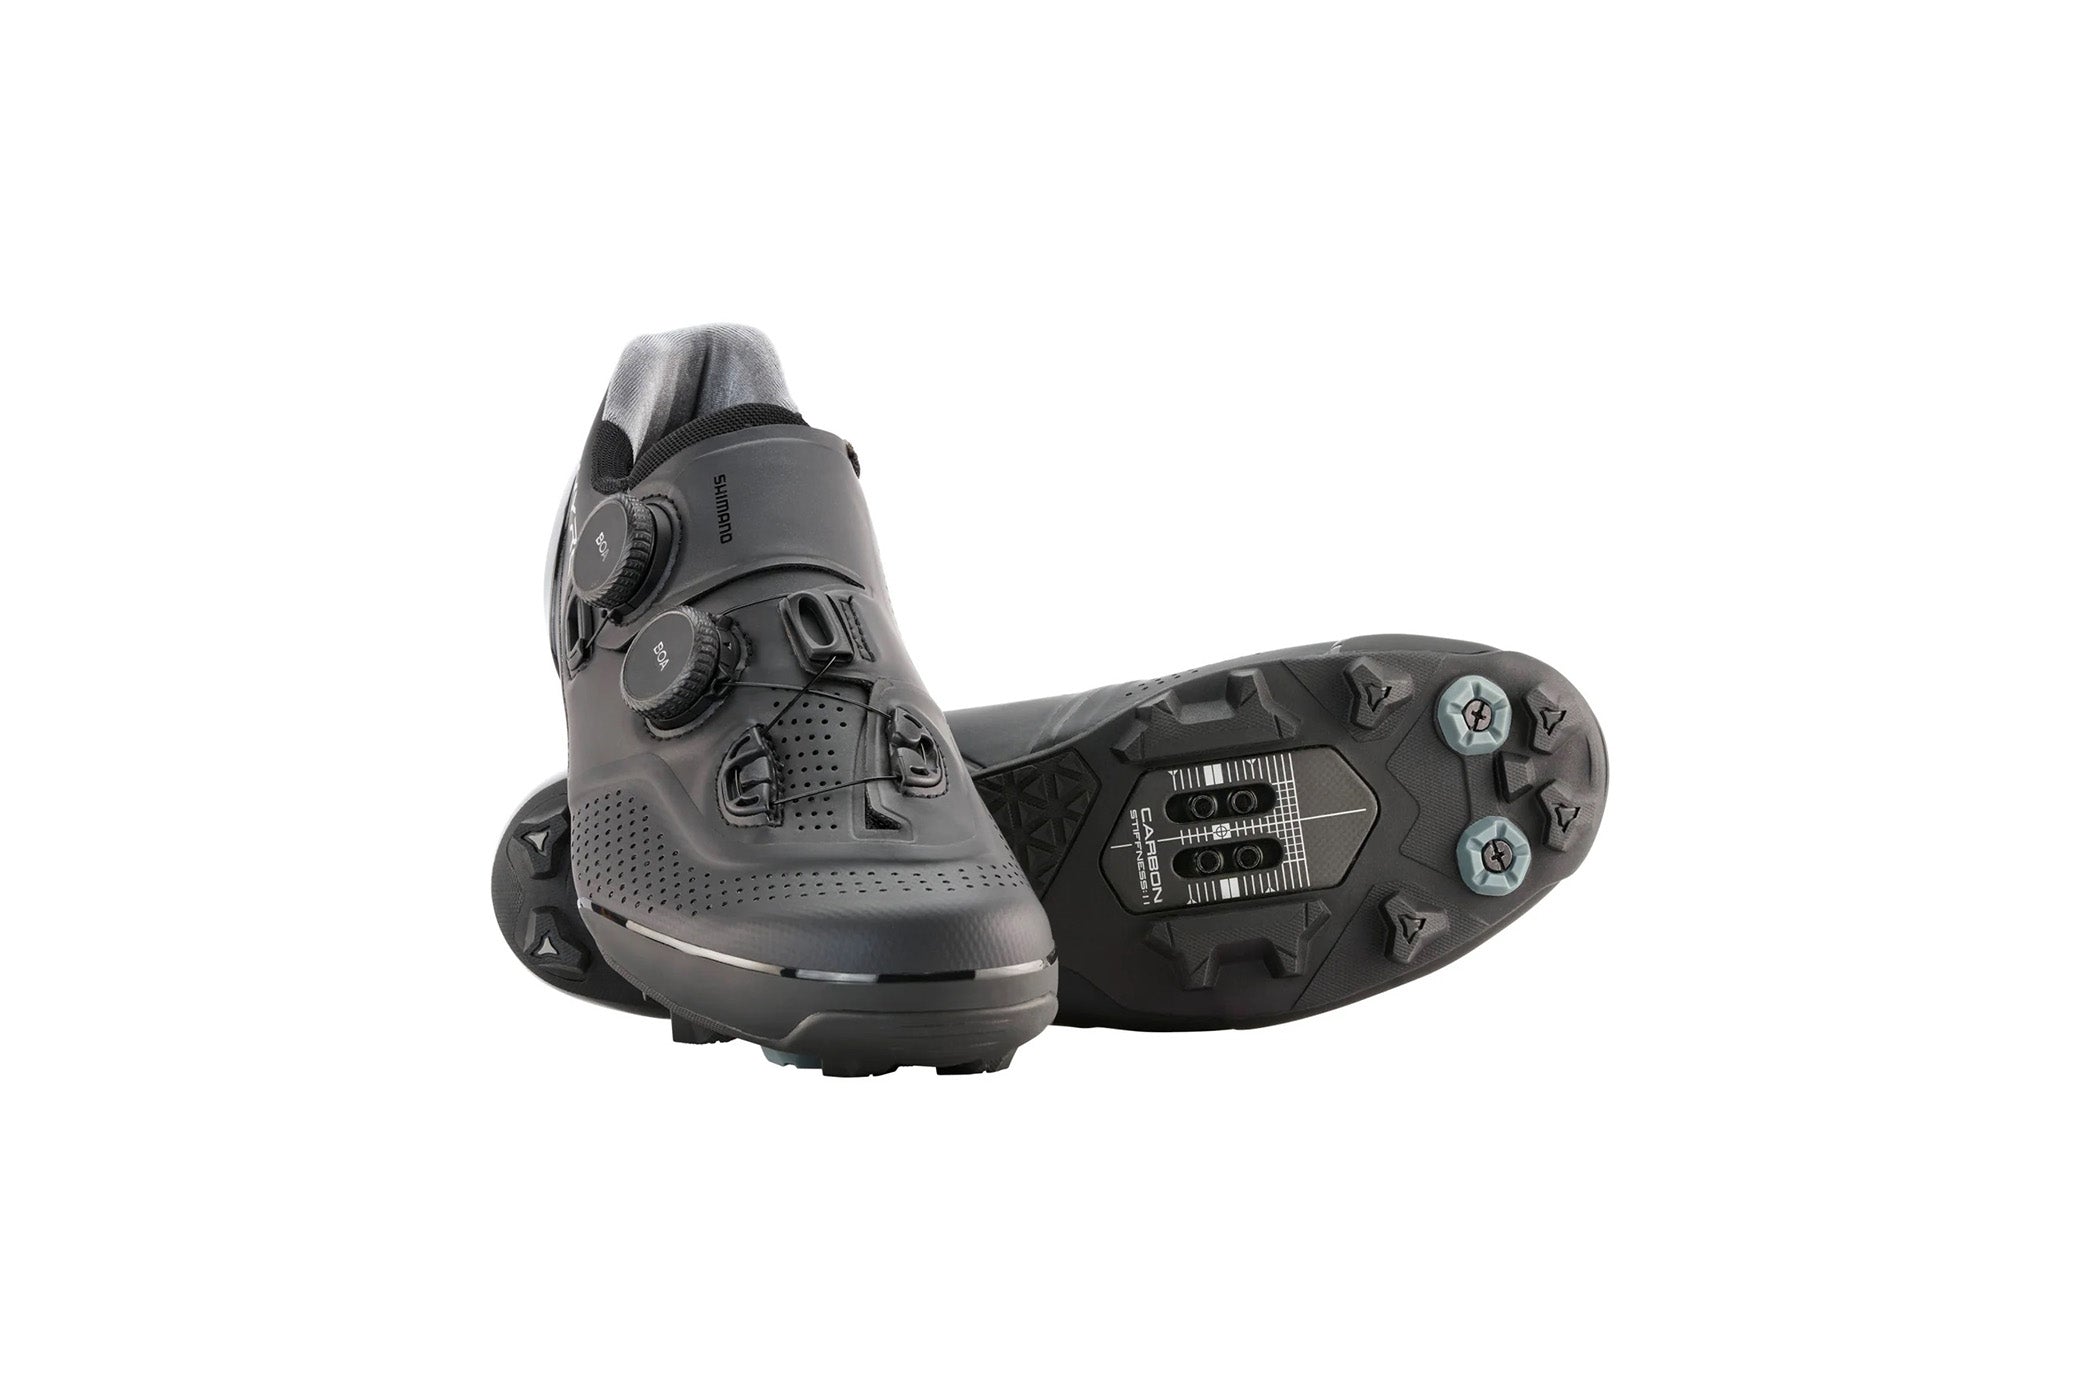 Shimano MTB Shoes Online - Low Prices | BIKE24